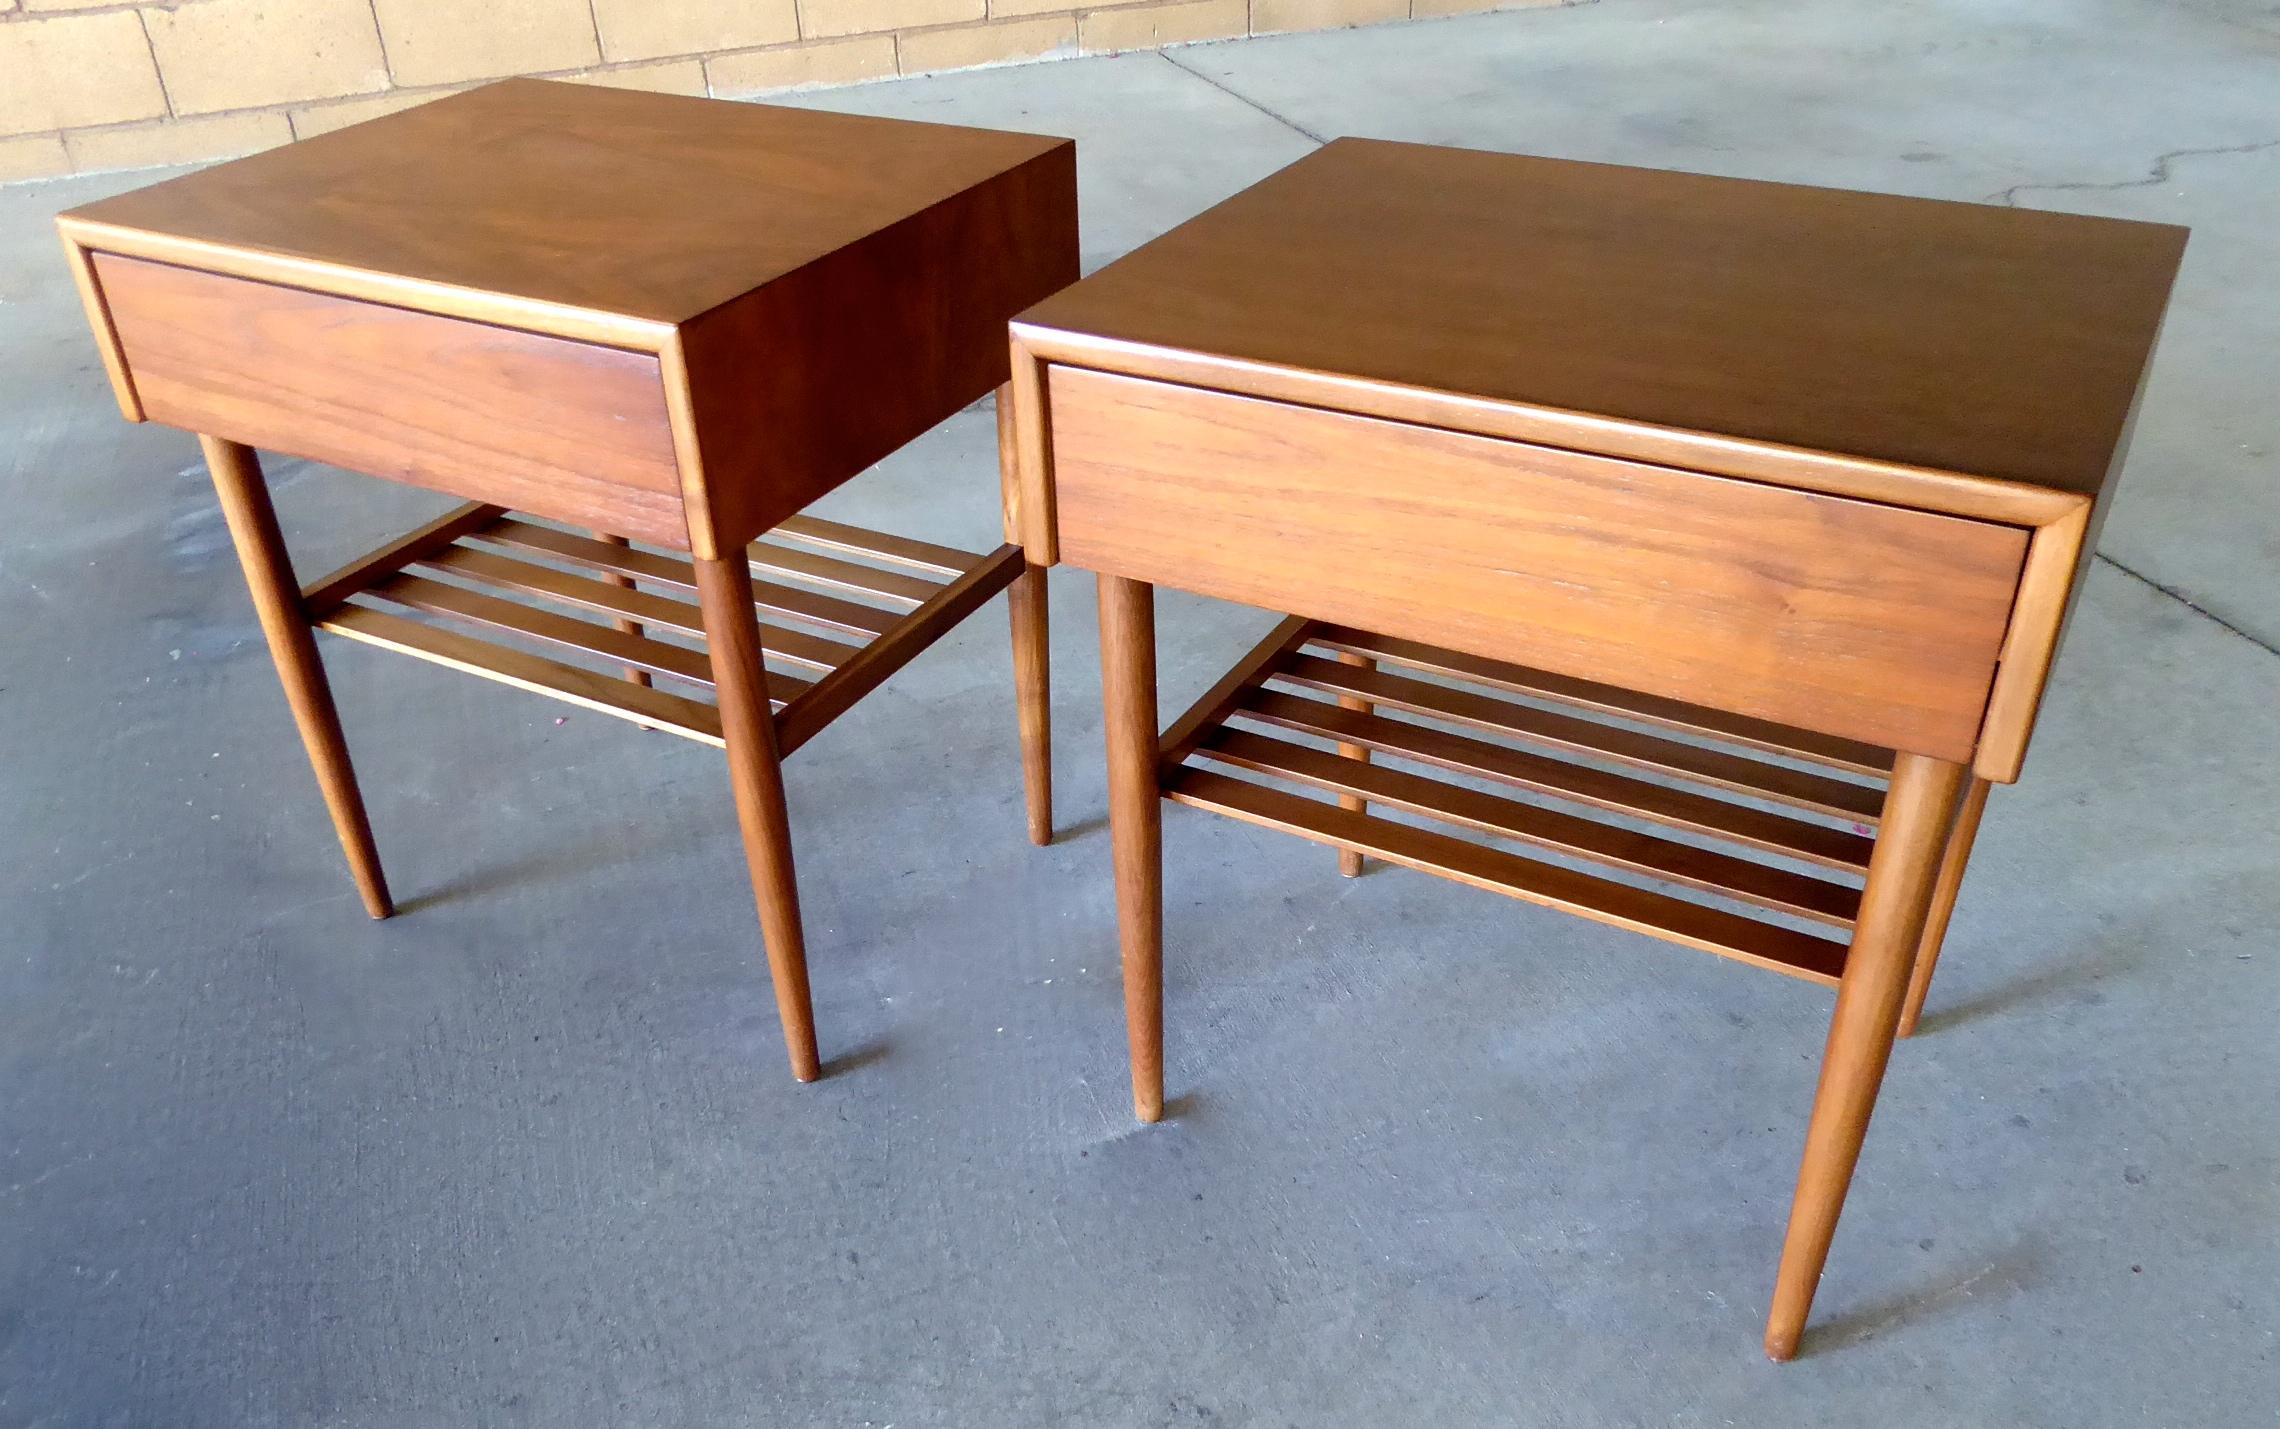 A pair of walnut bedside tables, each with a single drawer and slatted shelf, by California furniture company Brown Saltman, circa 1950s. Small and compact, these nightstands would be perfect in a second bedroom.